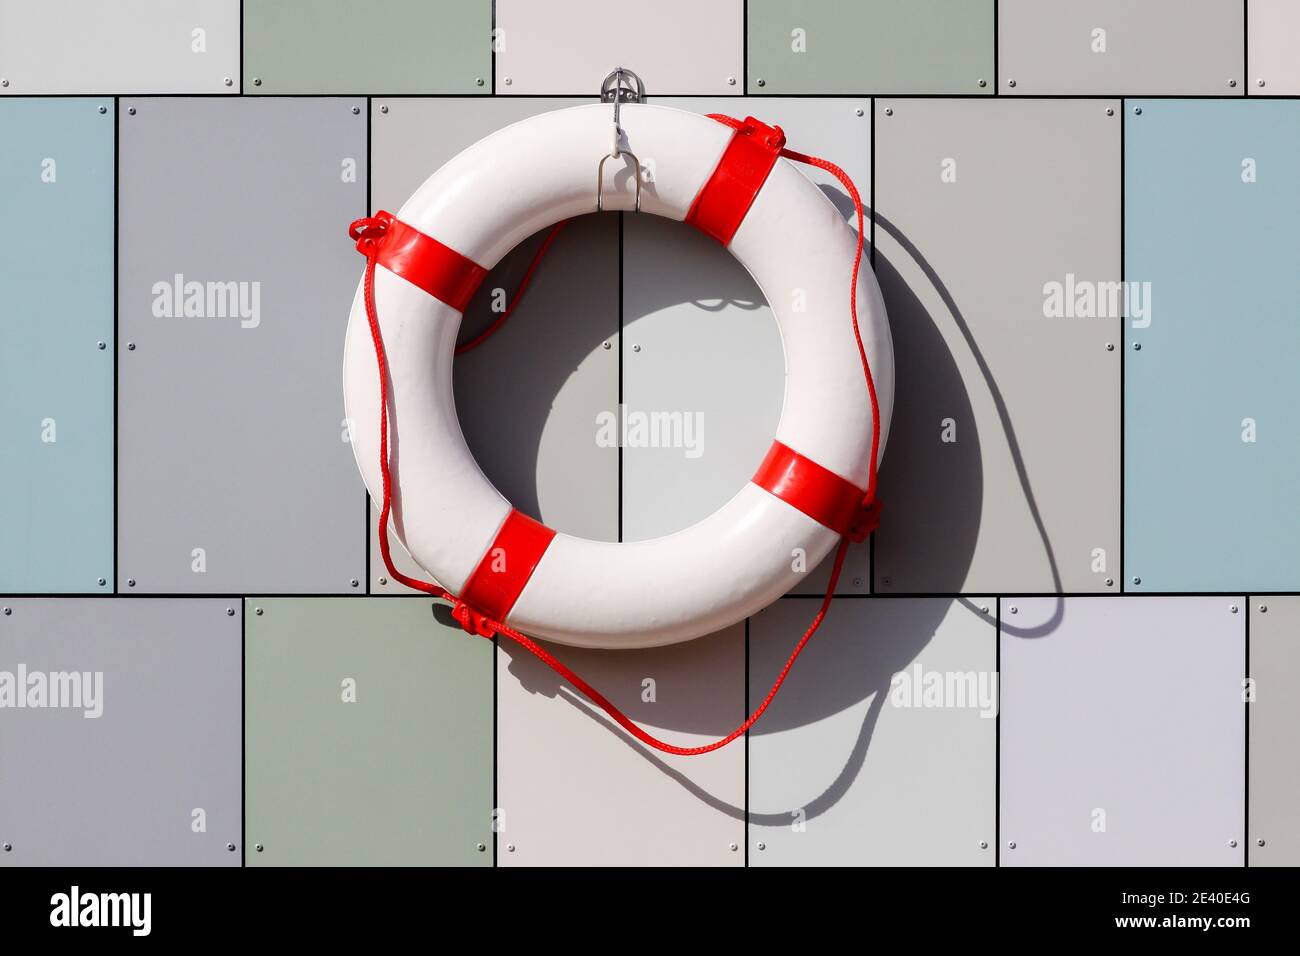 Lifebuoy hanging on a wall in Denmark Stock Photo